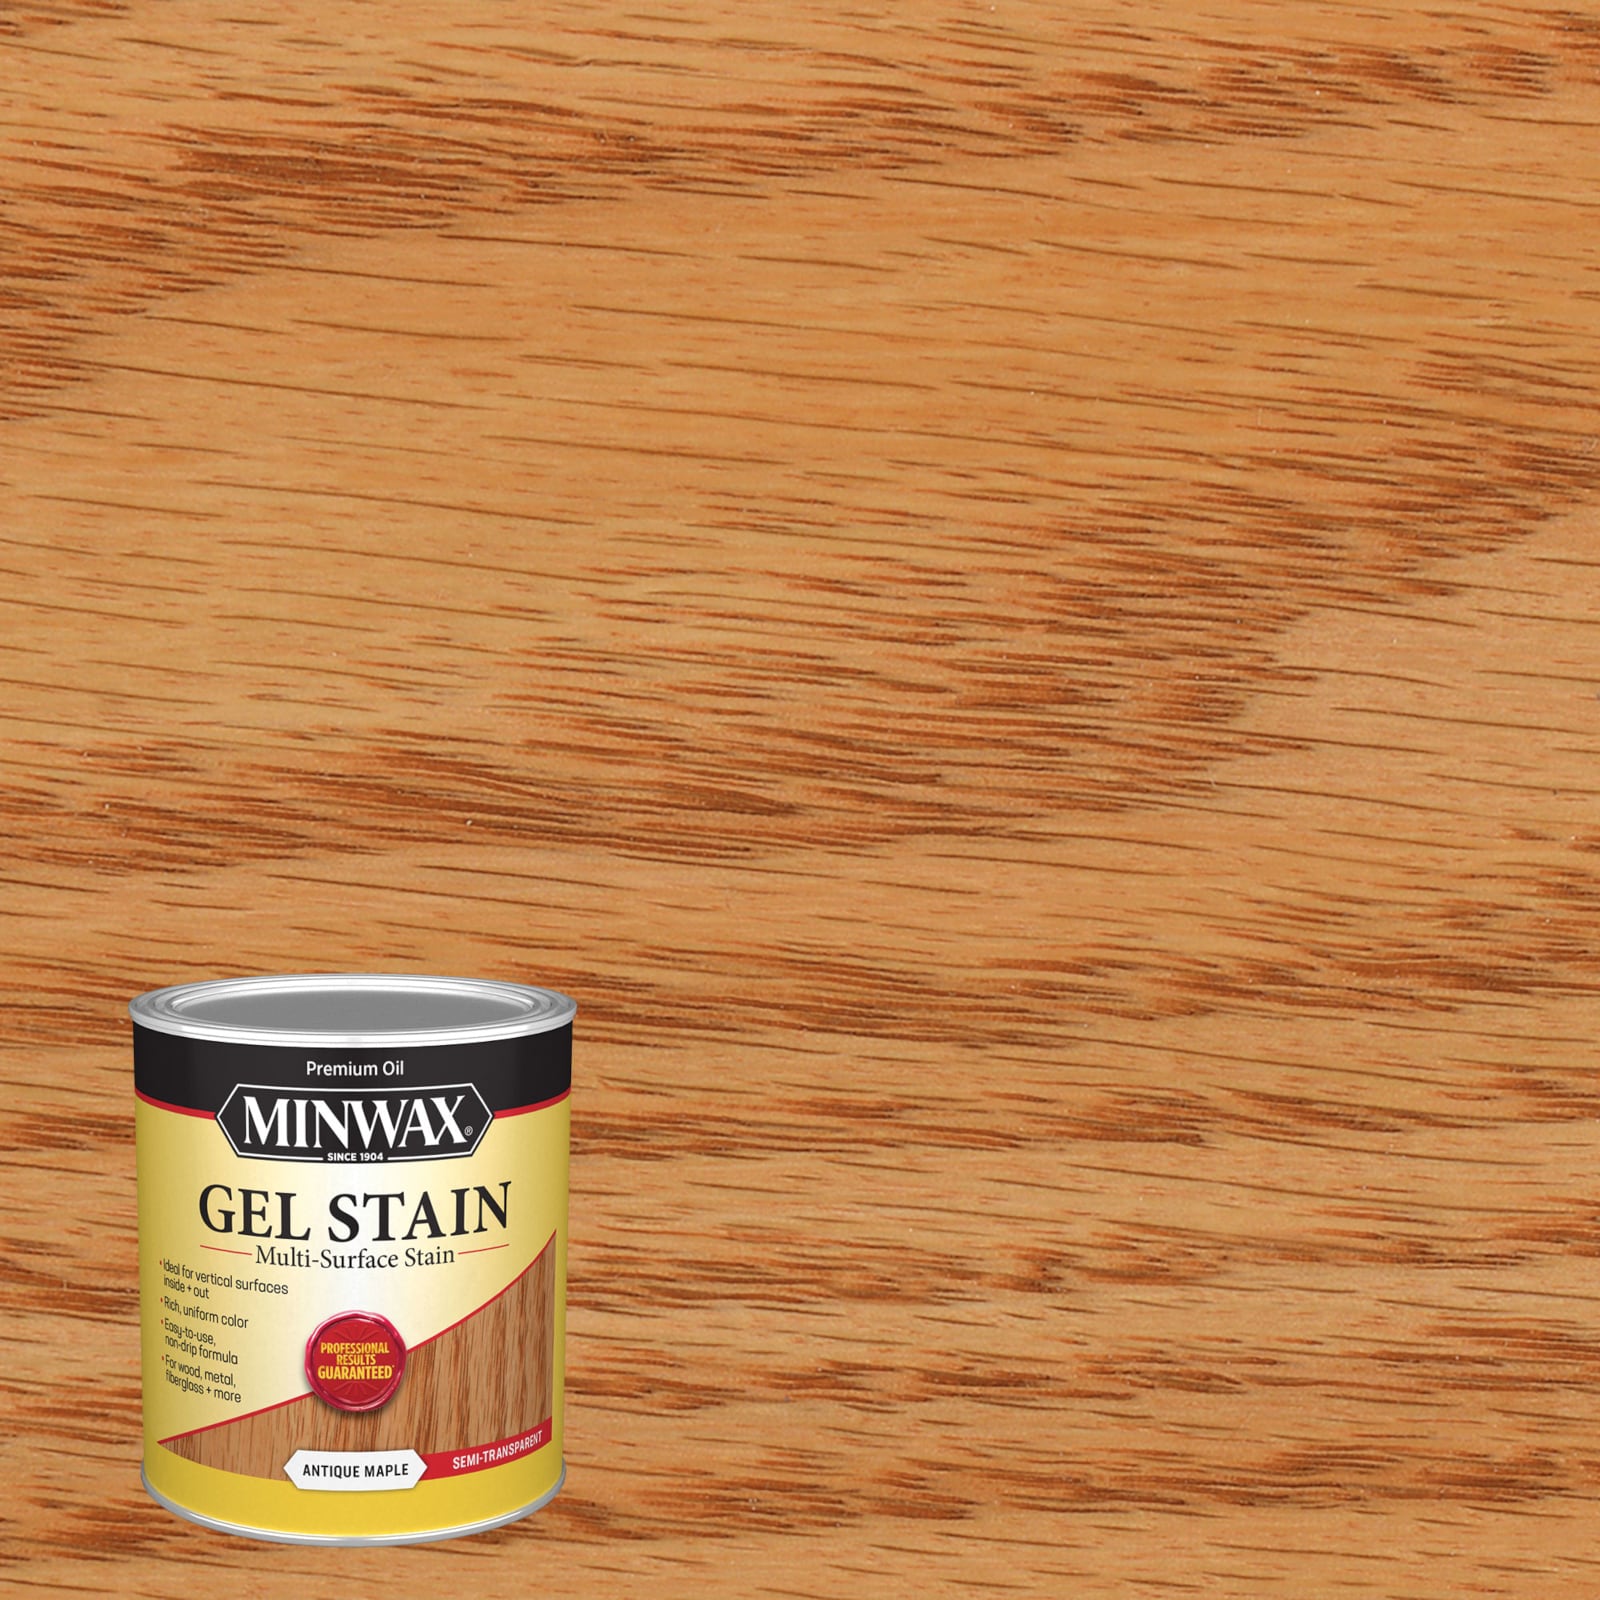 LMF: Antique Wood Stain